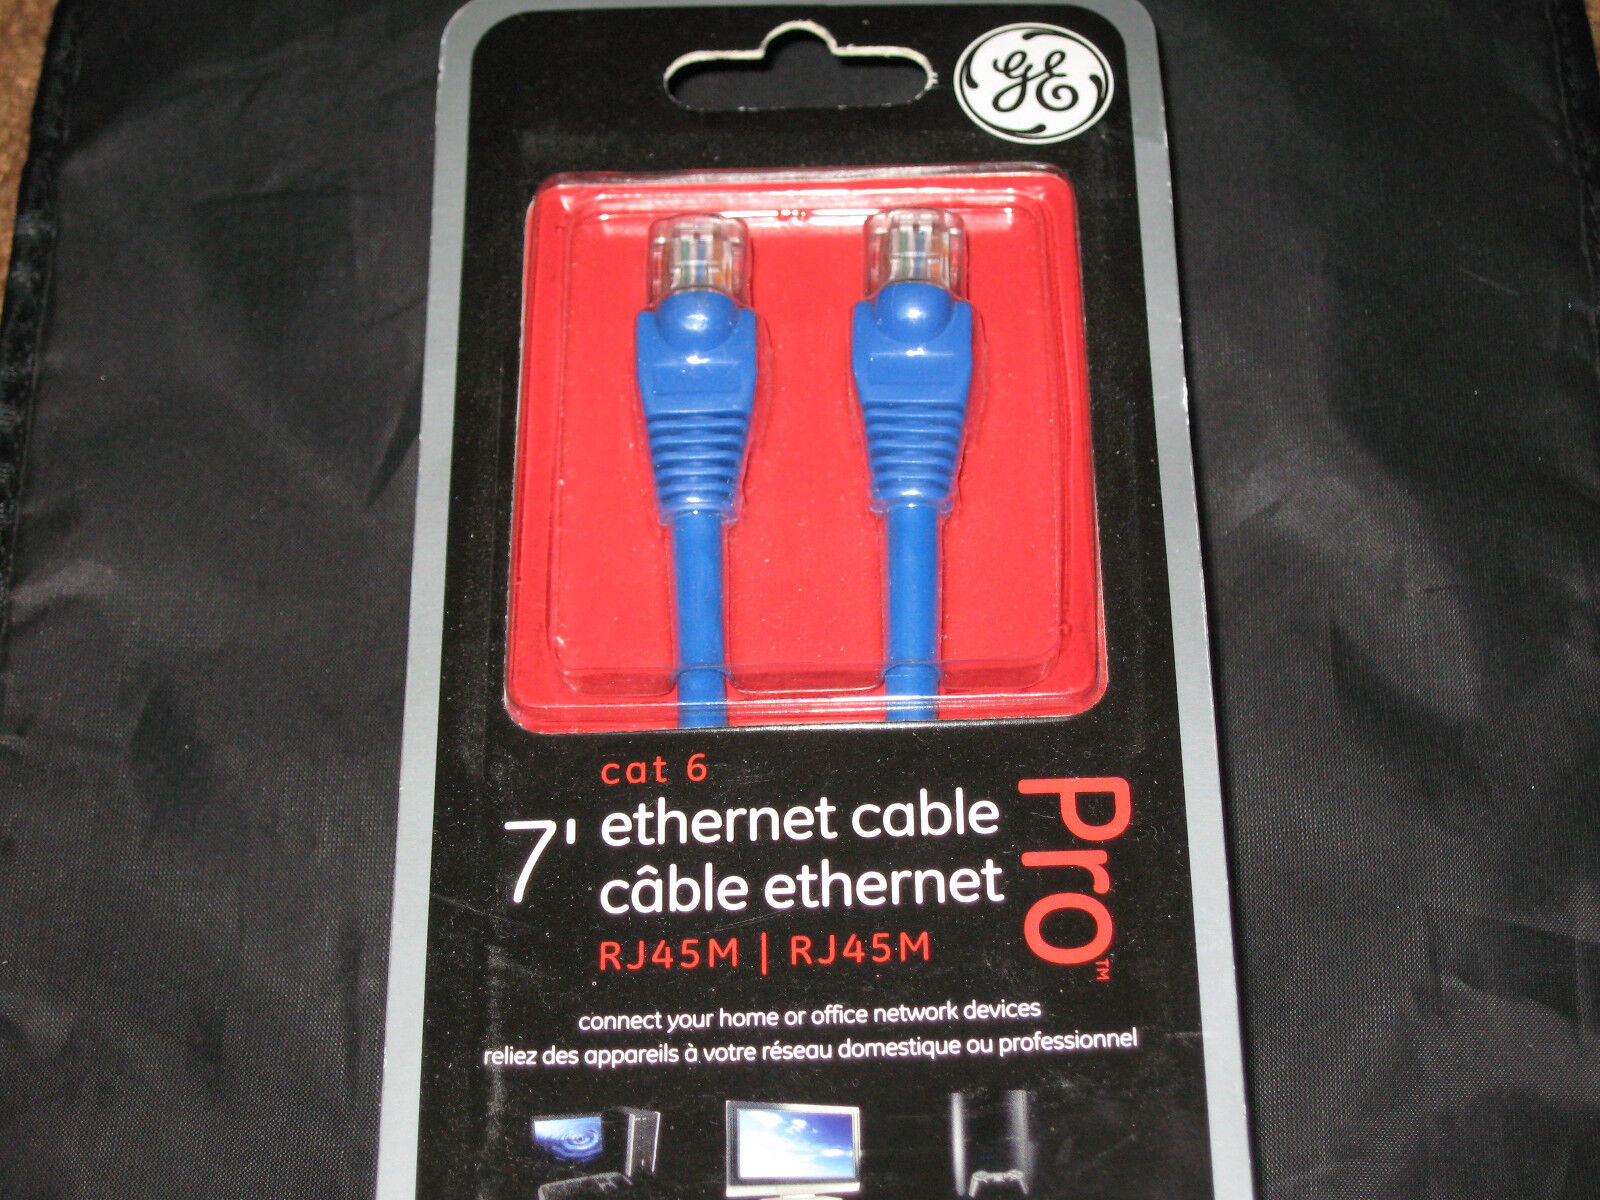 GE Pro Cat 6  Cable Ethernet RJ45M 7 ft. Cable Internet Home Office NEW